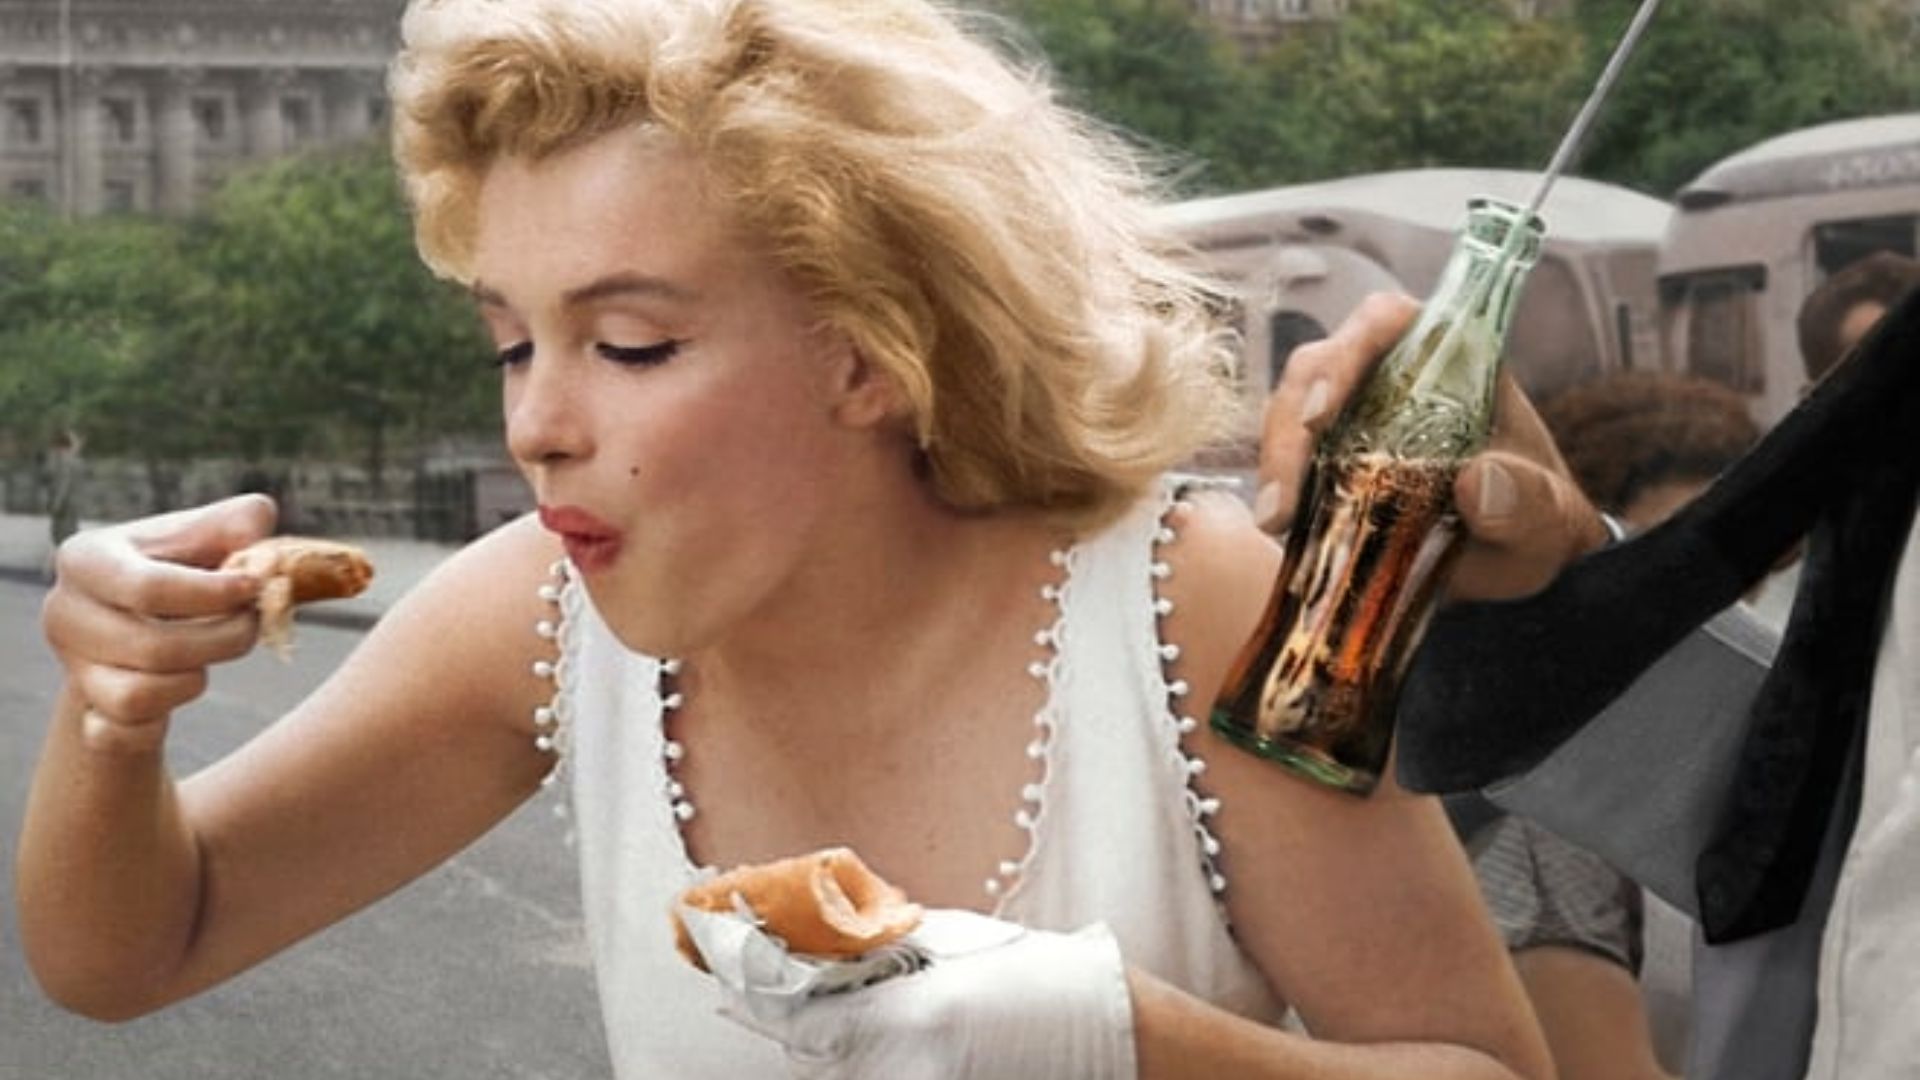 How Marilyn Monroe inspired new coke marketing tying the brand to food and culture